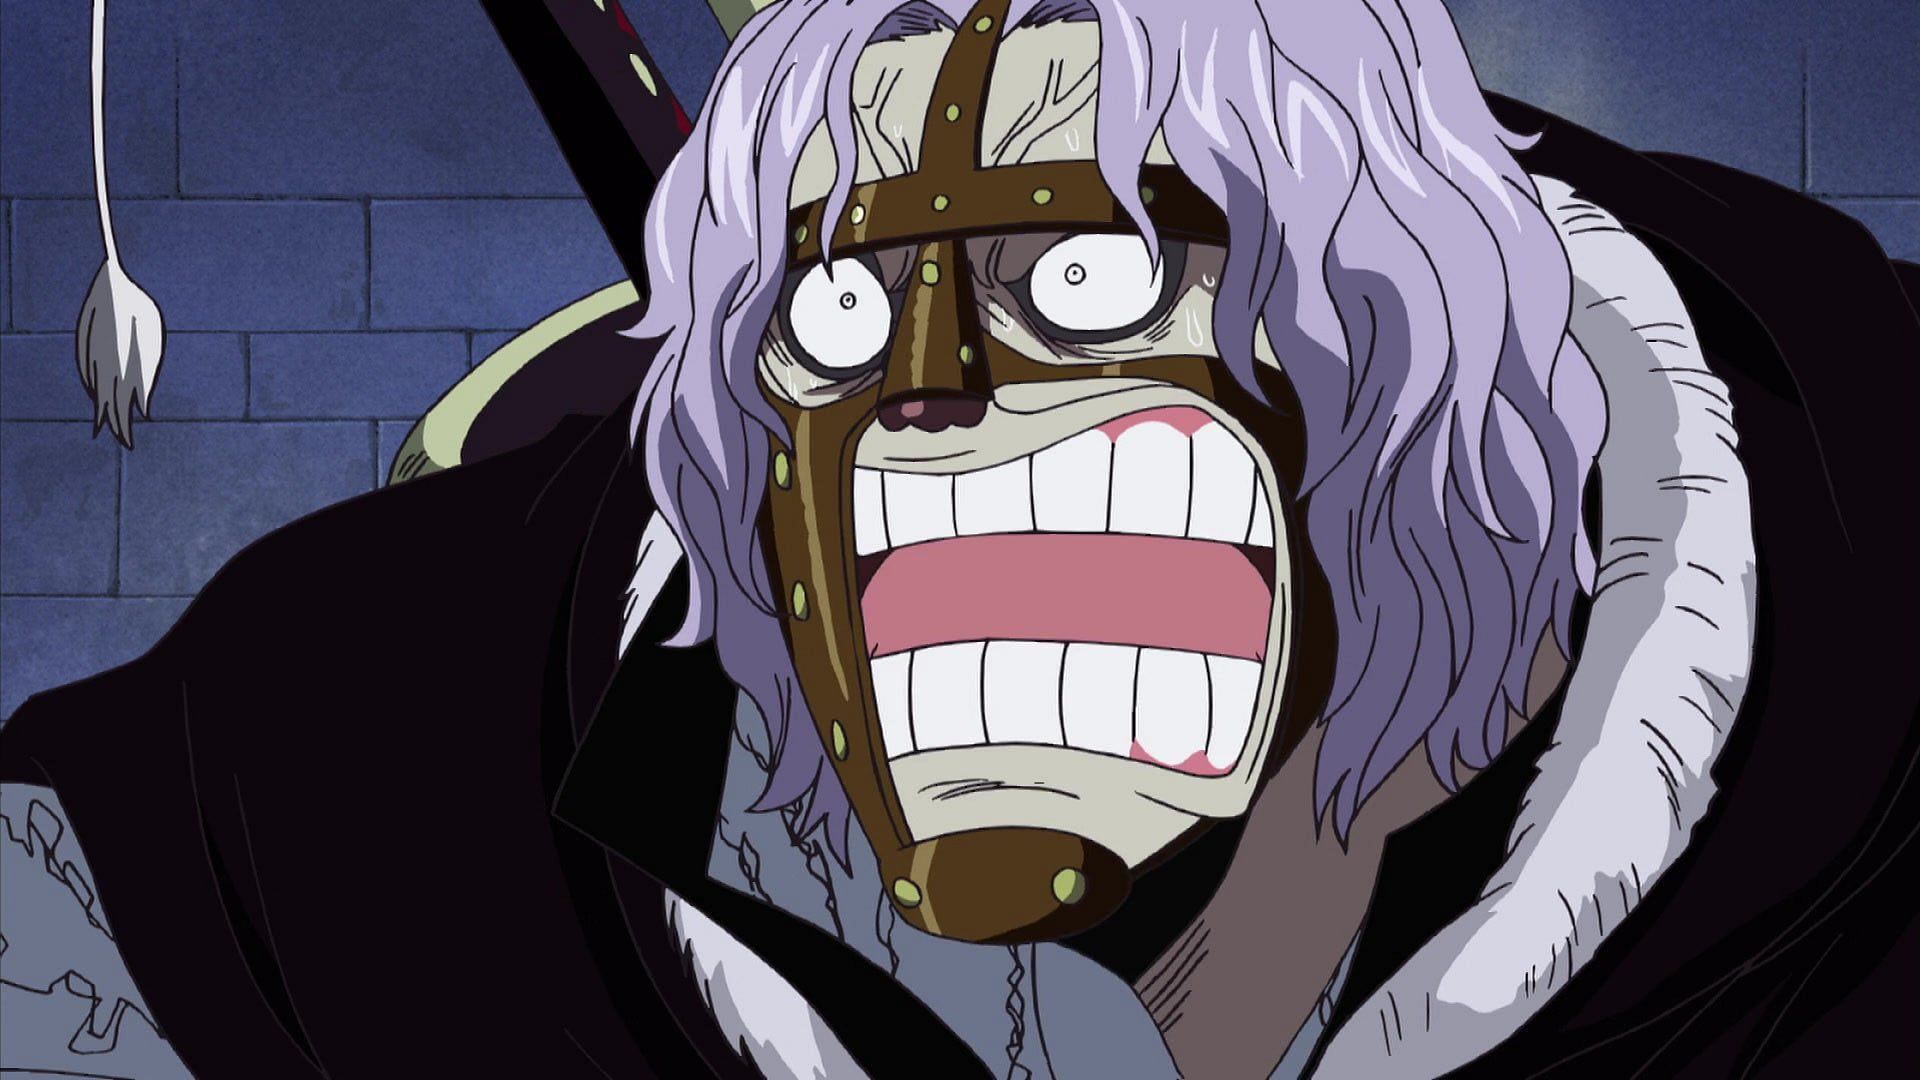 Spandam as seen in the anime series (Image via Toei Animation)